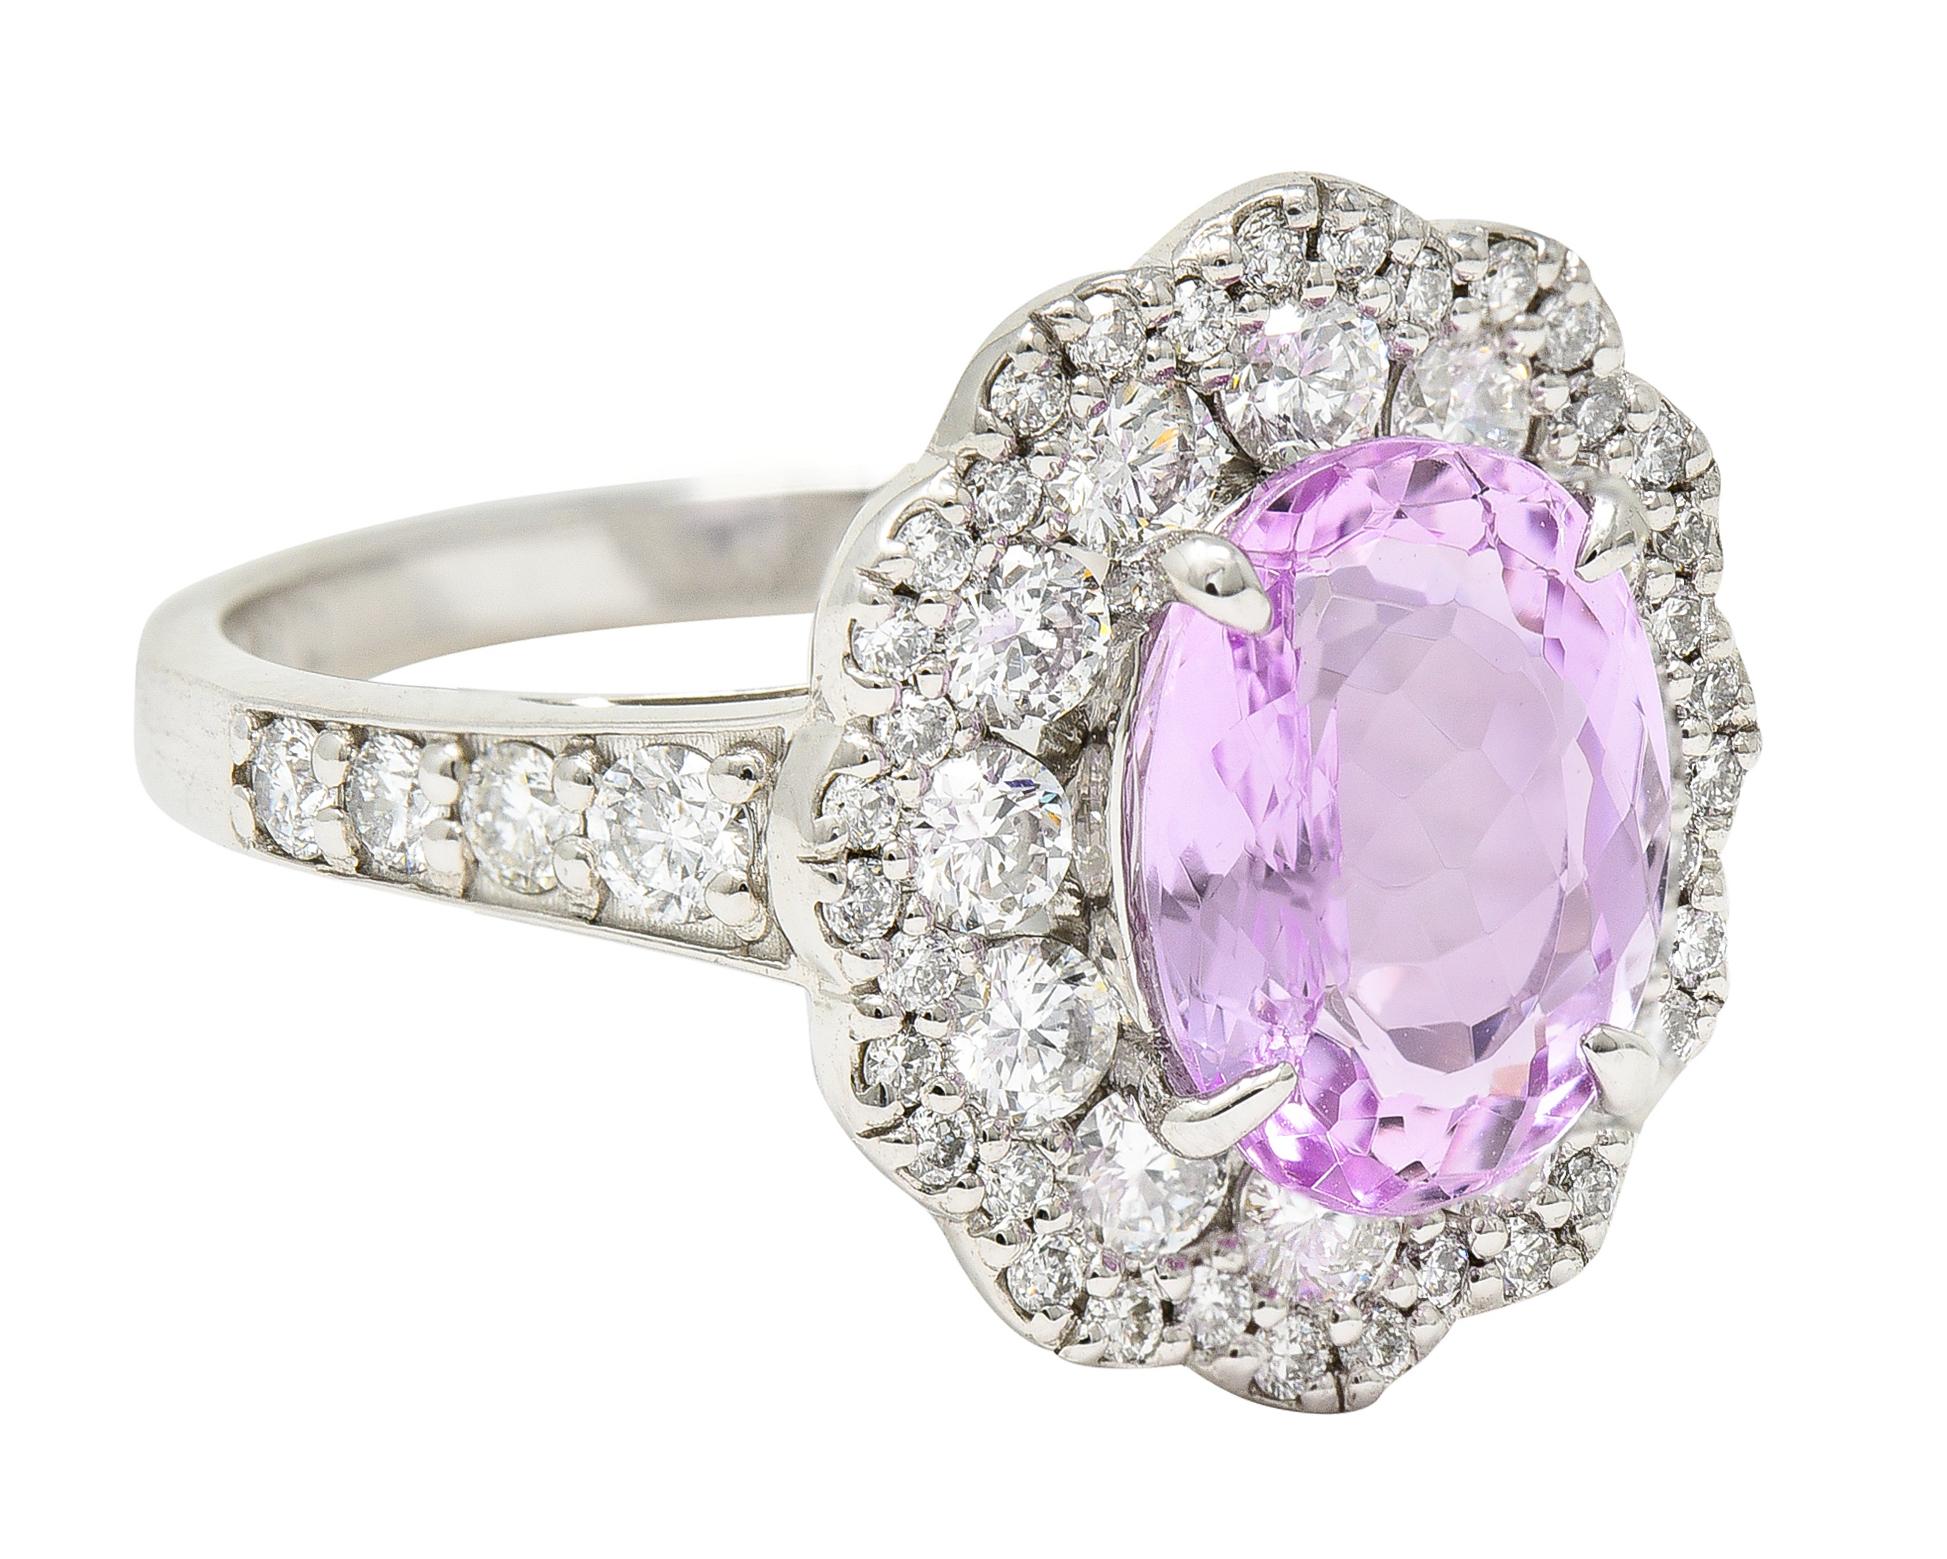 Cluster ring centers an oval cut topaz weighing 2.80 carats. Eye-clean with medium light lavender pink color. With a pavè diamond surrounded with a scalloped petal like halo. Completed by cathedral shoulders set with additional round brilliant cut